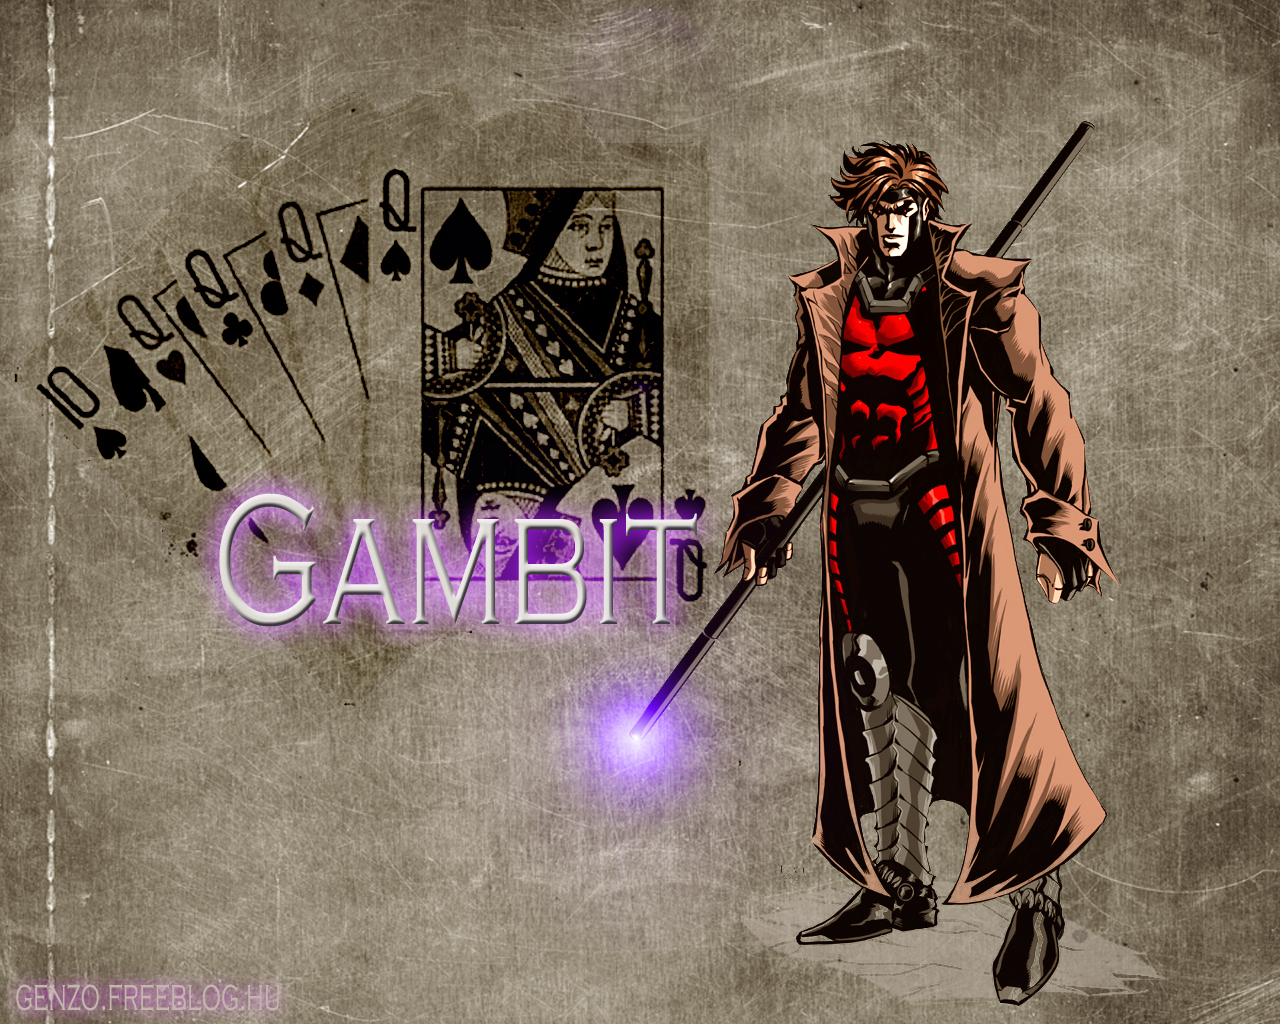 X Men Image Gambit HD Wallpaper And Background Photos